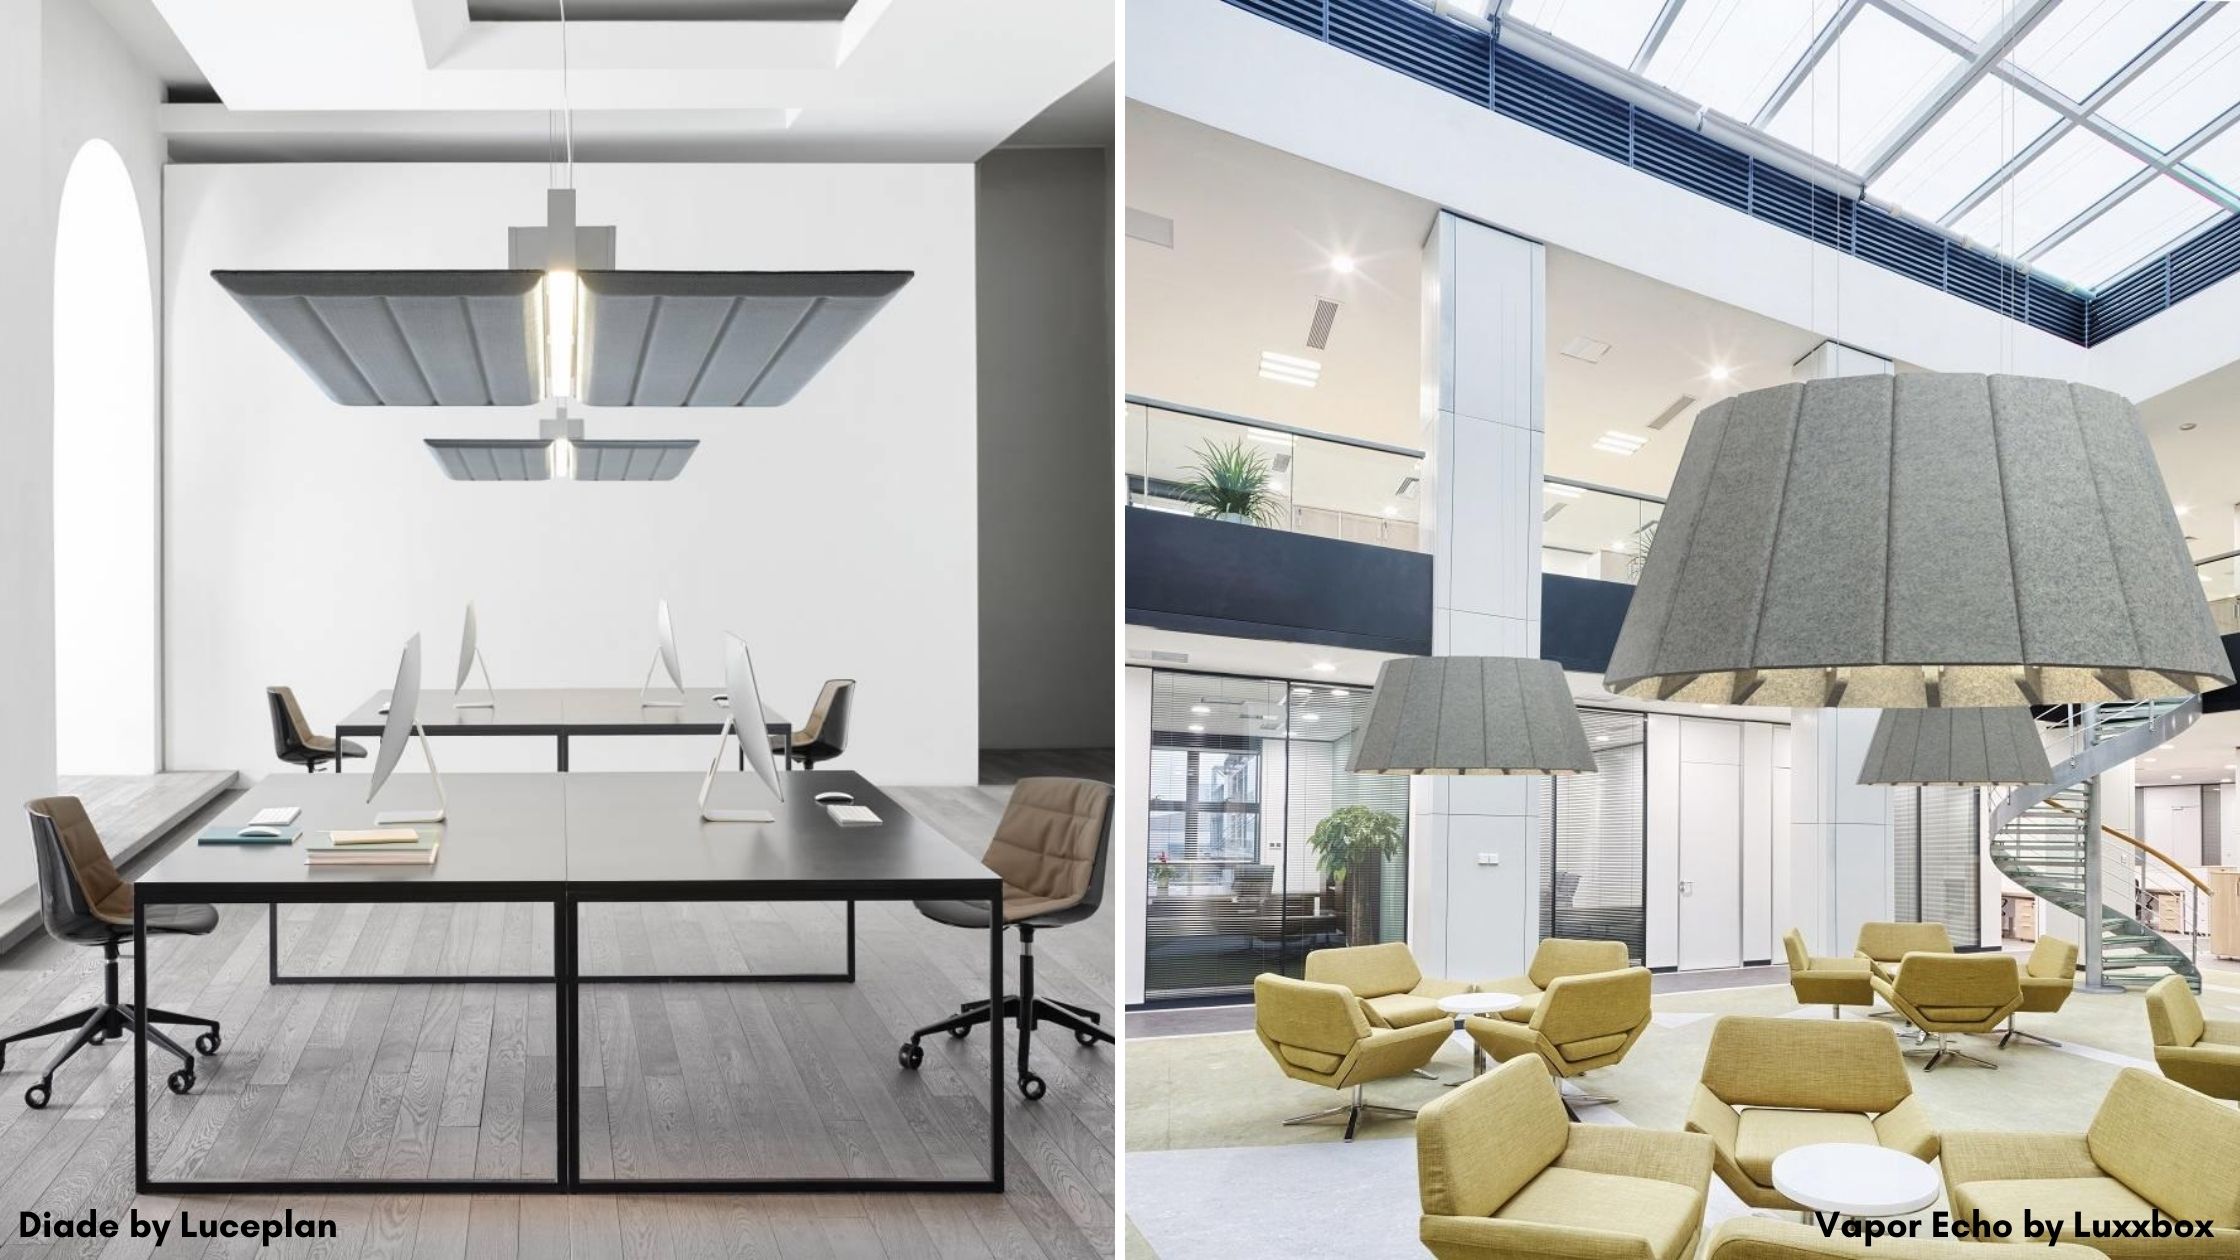 Grey rectangular and circular acoustic light fixtures suspended from ceilings over shared workstations and lounge chairs 